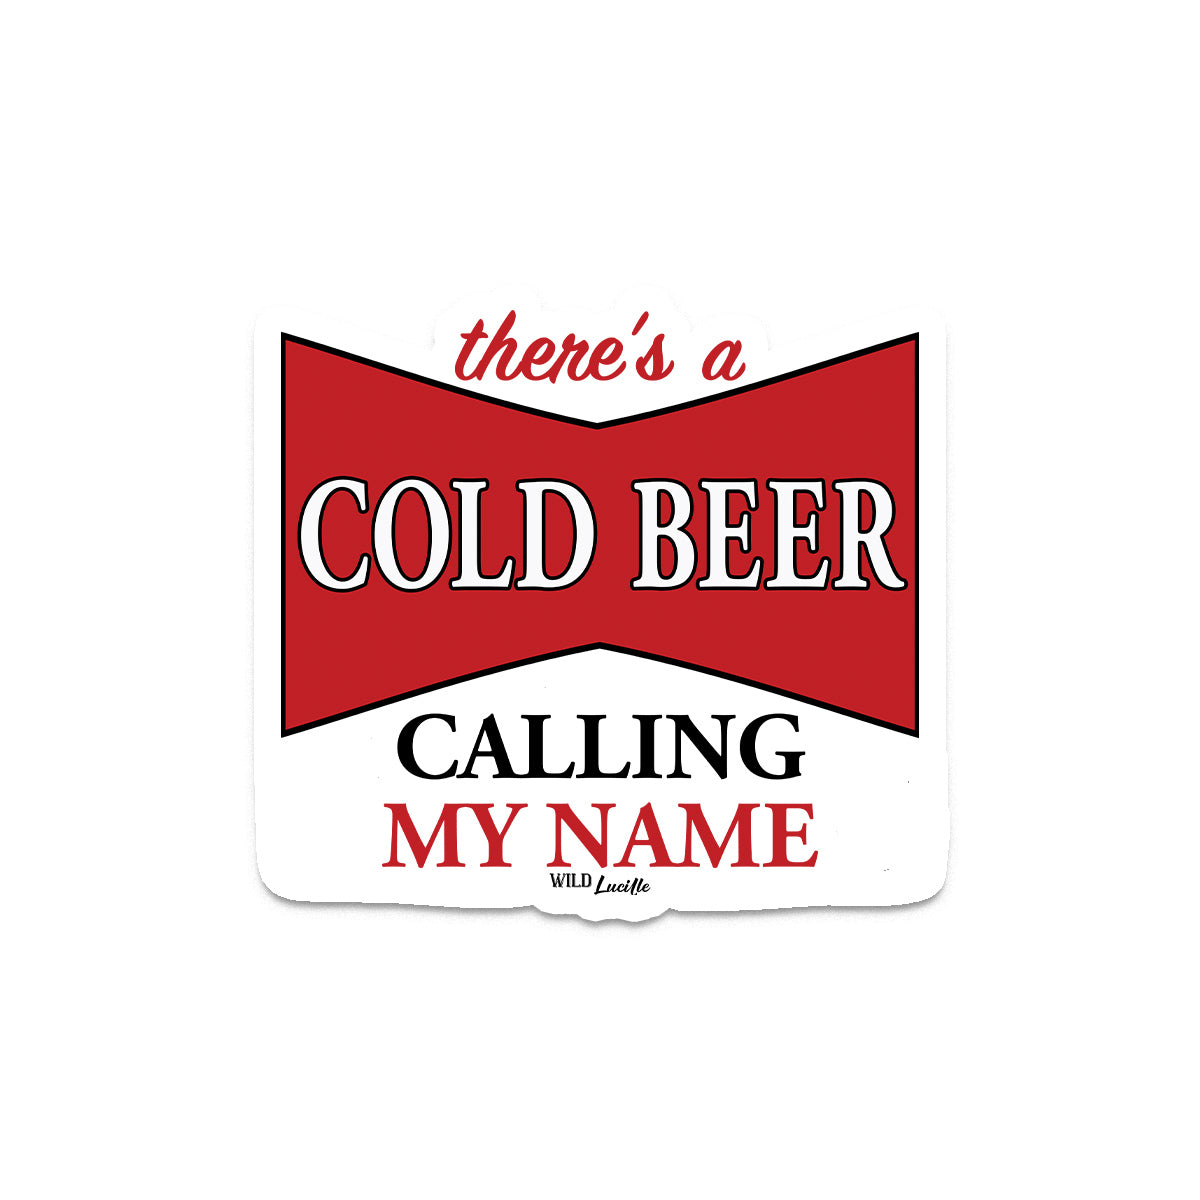 There's a Cold Beer Calling My Name - Vinyl Sticker Decals